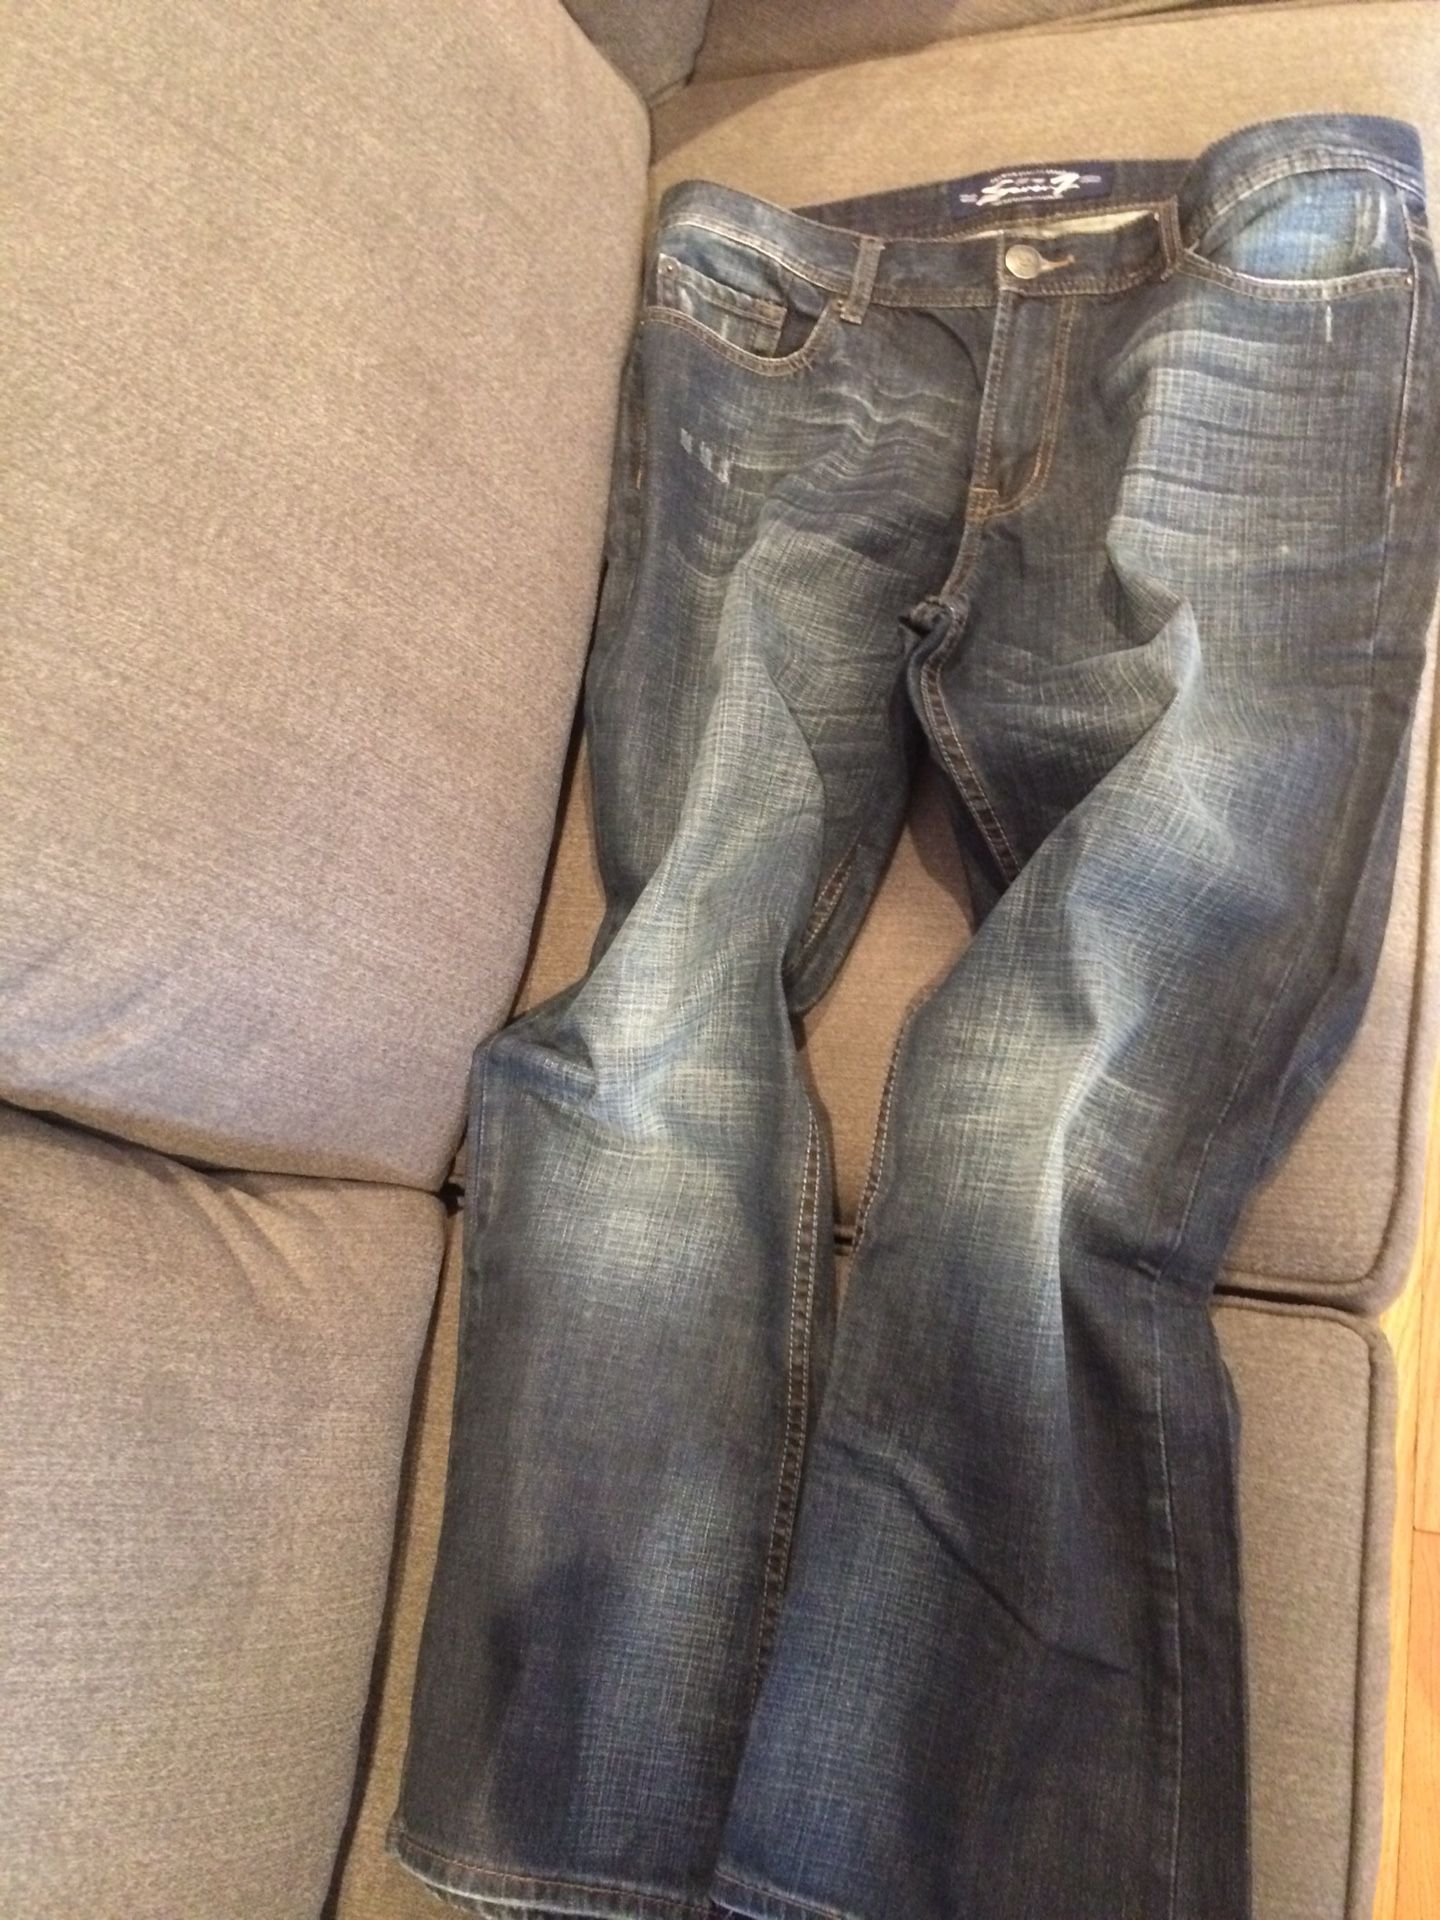 New Men’s high end brand 7 seven jeans